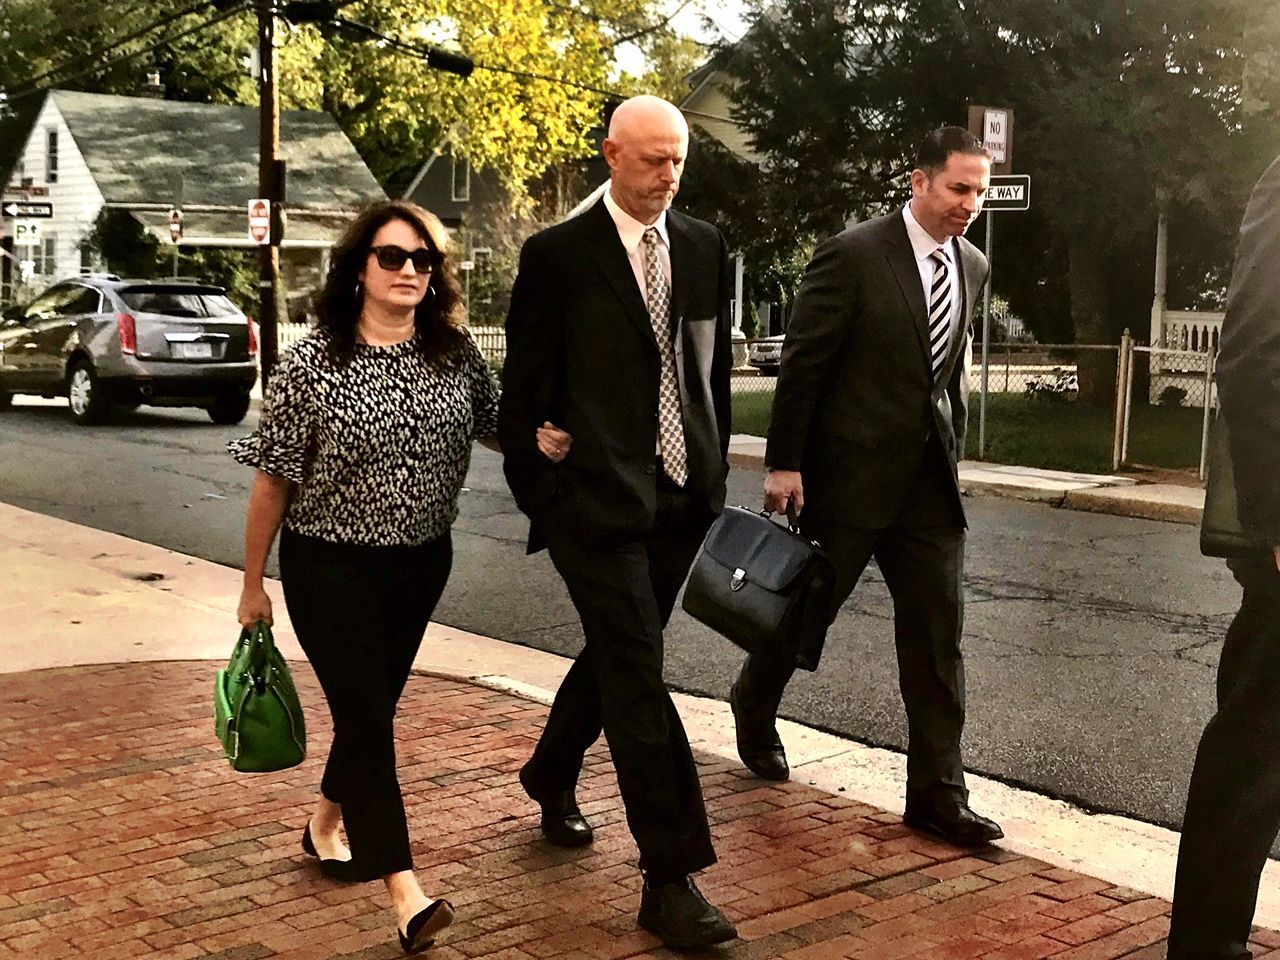 John Miller IV (center), with his wife and attorney, entering the Loudoun County Courthouse. Miller was found guilty of reckless driving in the crash that killed Tristan Schulz. (WTOP/Neal Augenstein)
